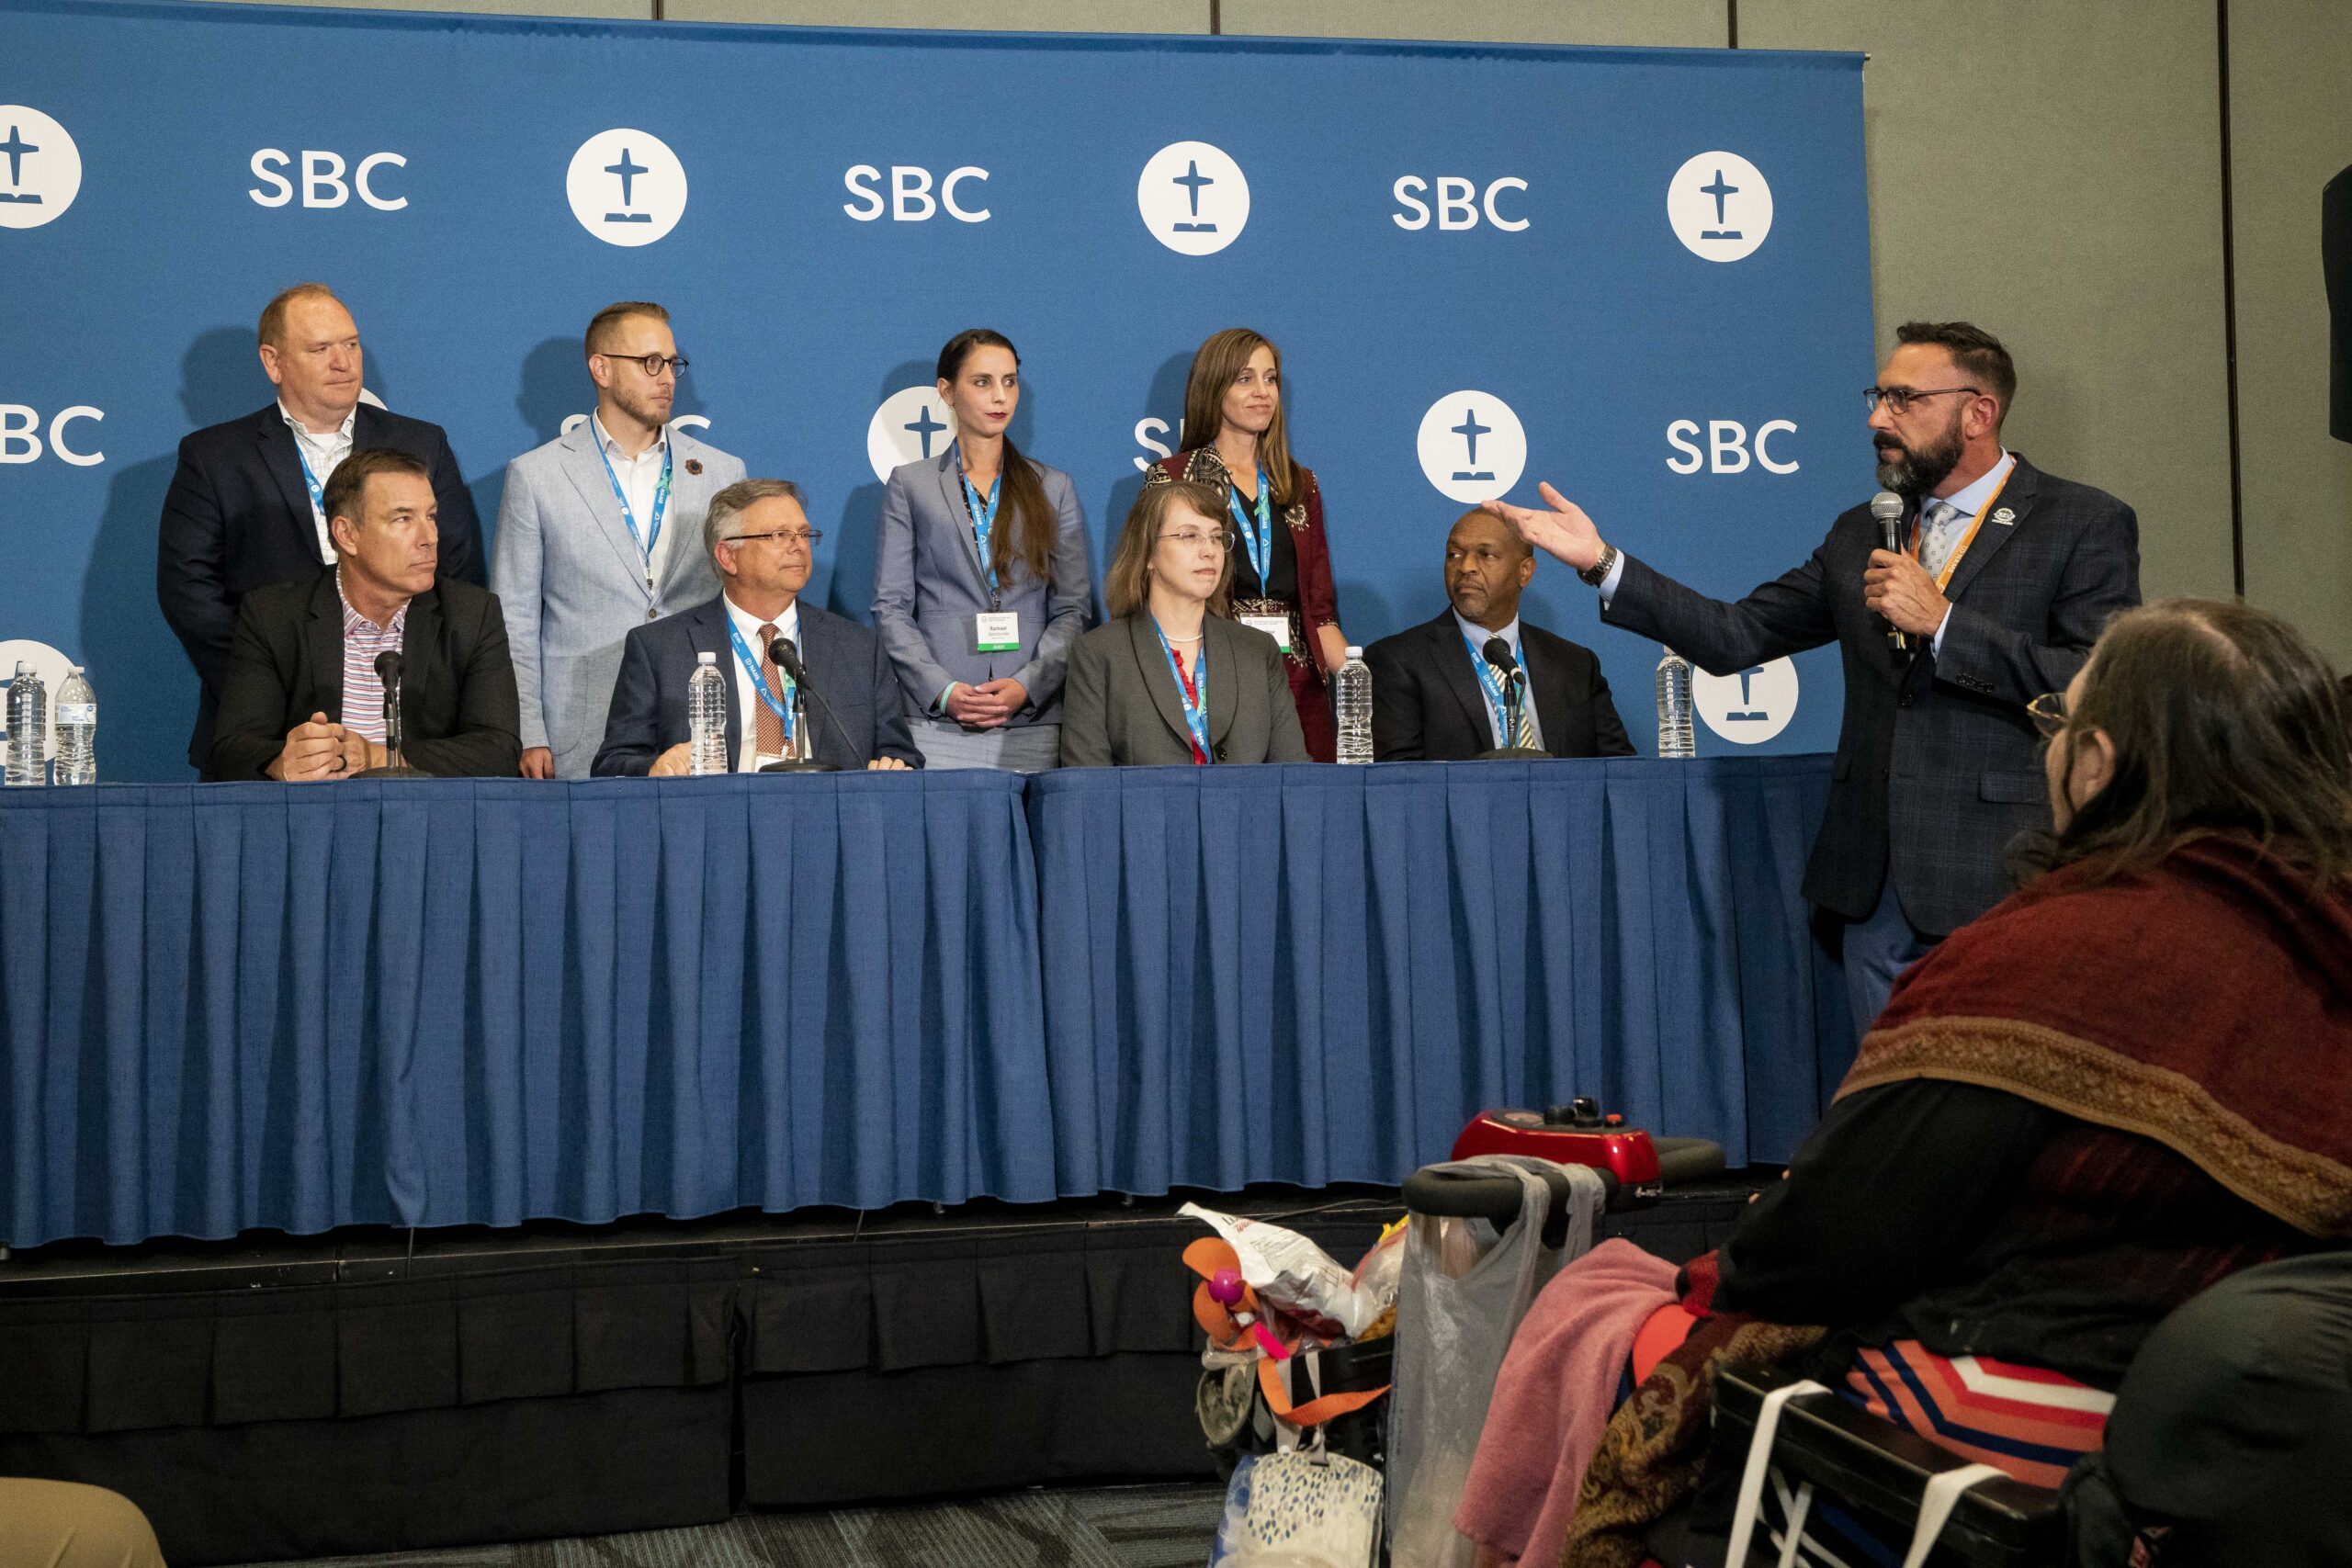 The Sexual Abuse Task Force holds a press conference during the Southern Baptist Convention, held at the Anaheim Convention Center in Anaheim, California, on Tuesday, June 14, 2022. Photo by Justin L. Stewart/Religion News Service